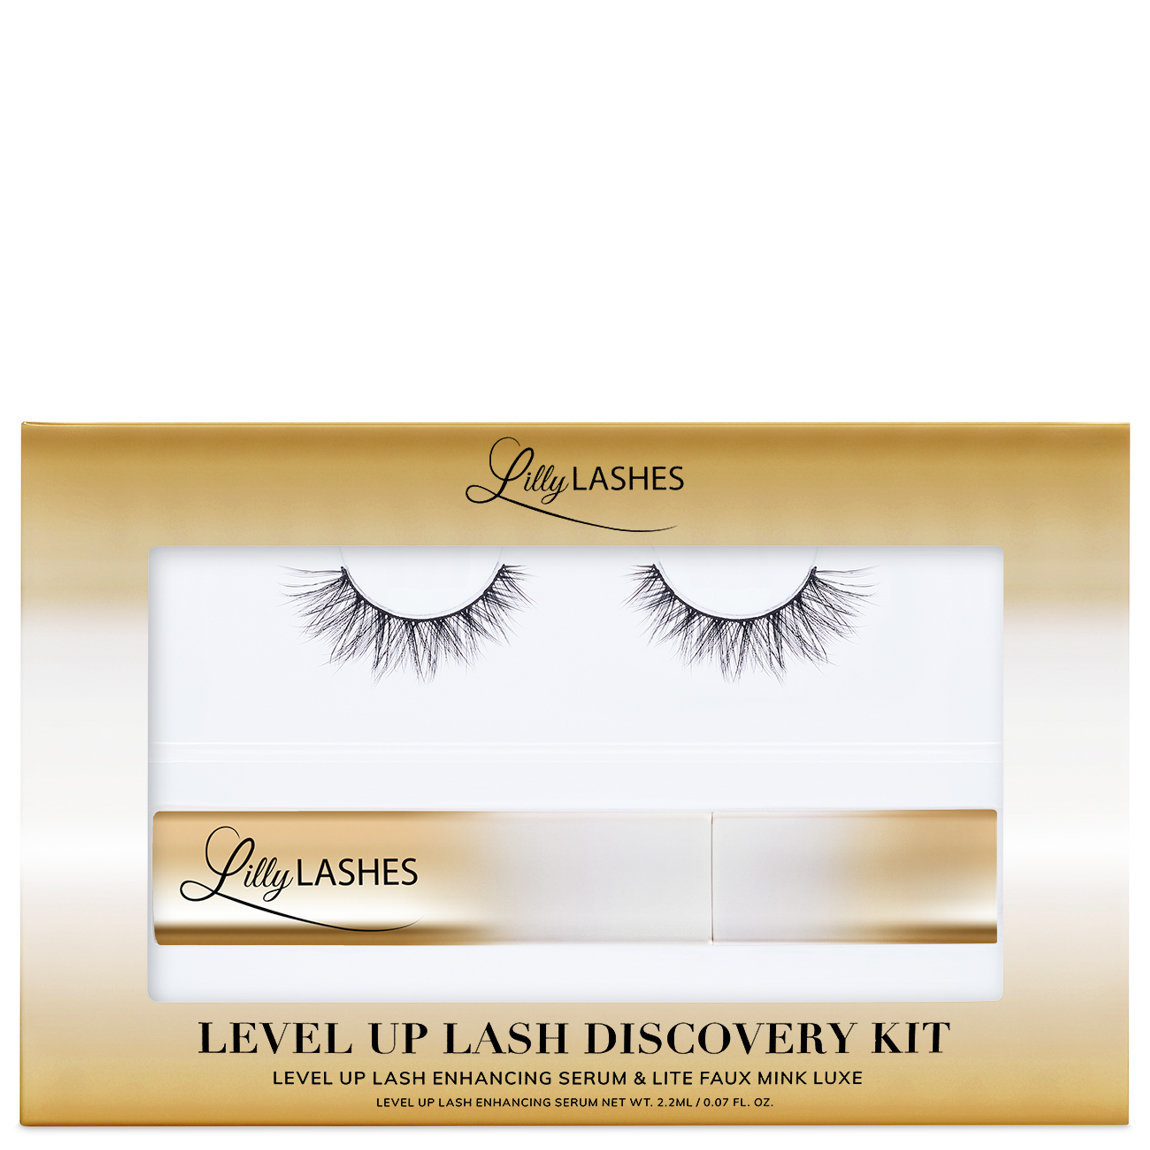 Lilly Lashes Level Up Lash Discovery Kit alternative view 1 - product swatch.